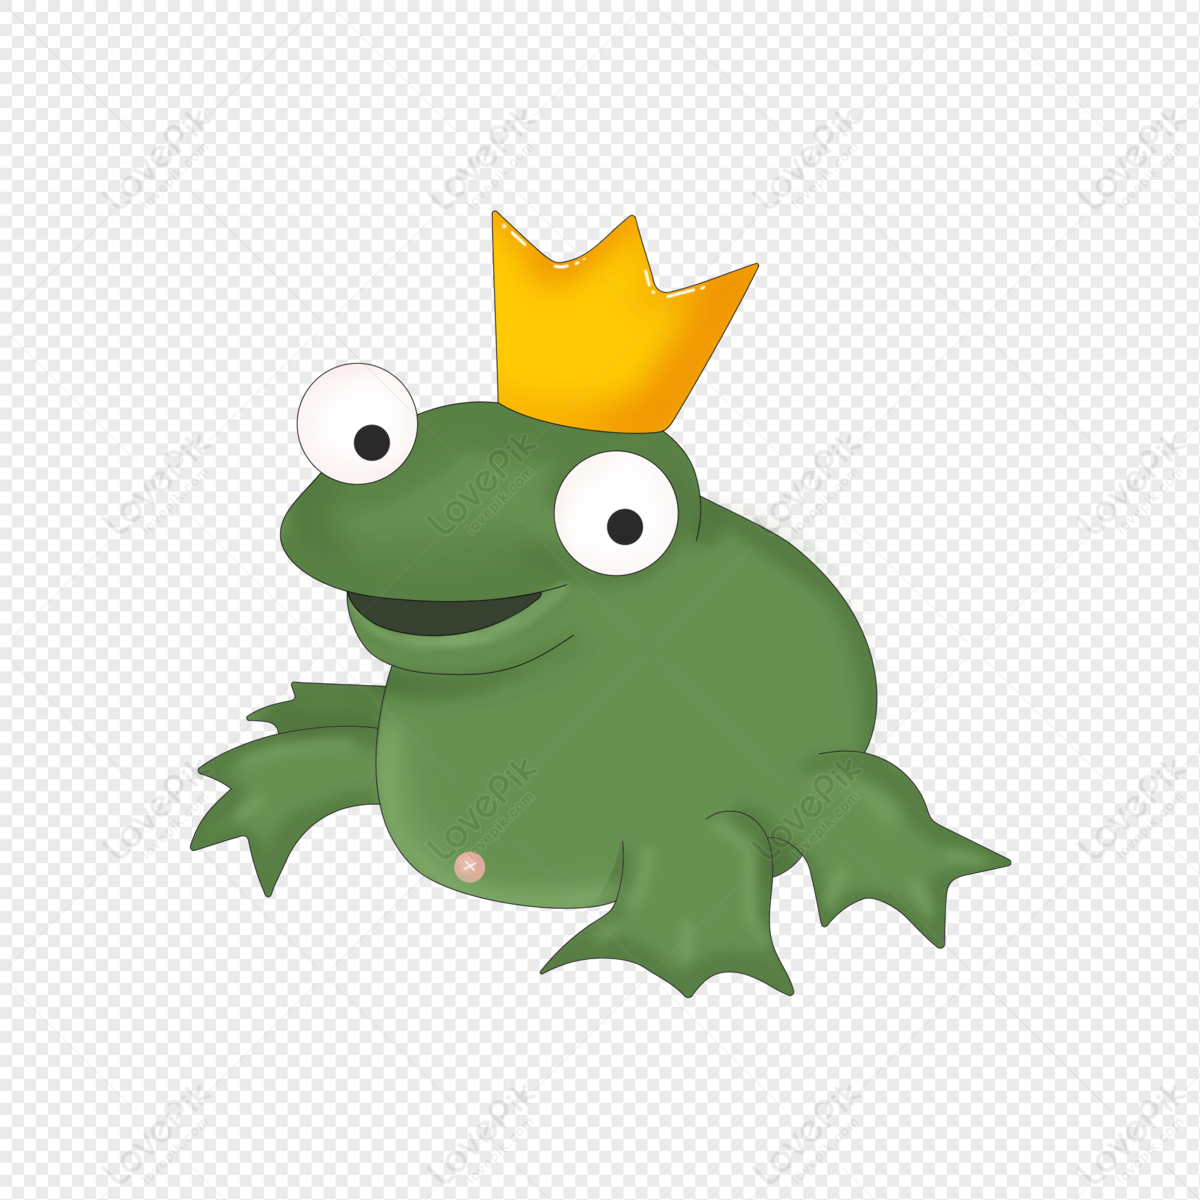 frog prince clipart free